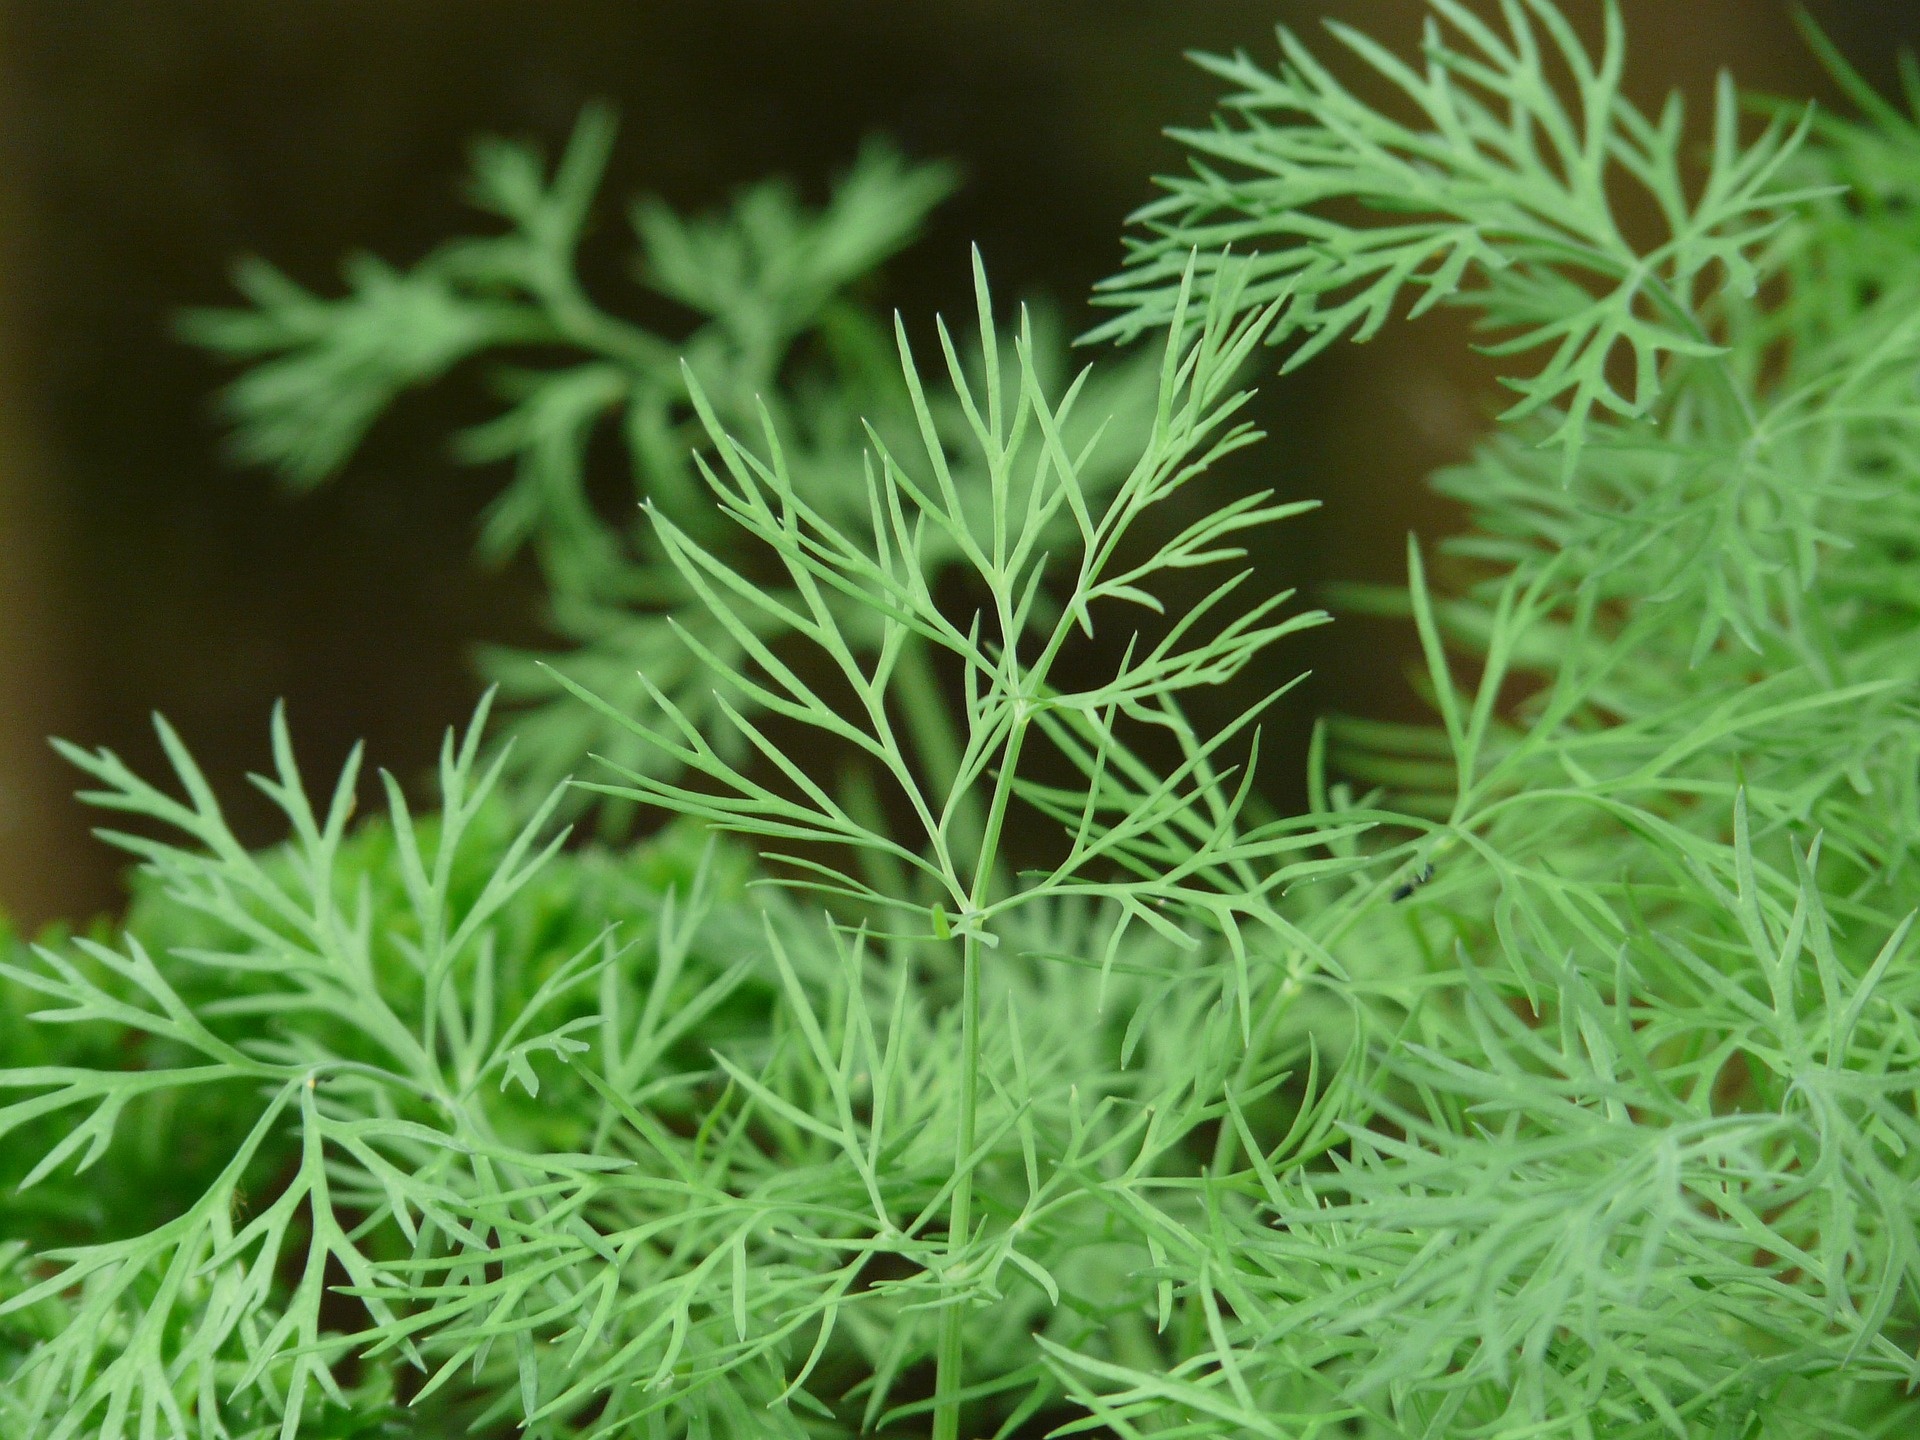 Online dill herb shopping, Convenient availability, Fresh culinary addition, Flavoursome delight, 1920x1440 HD Desktop